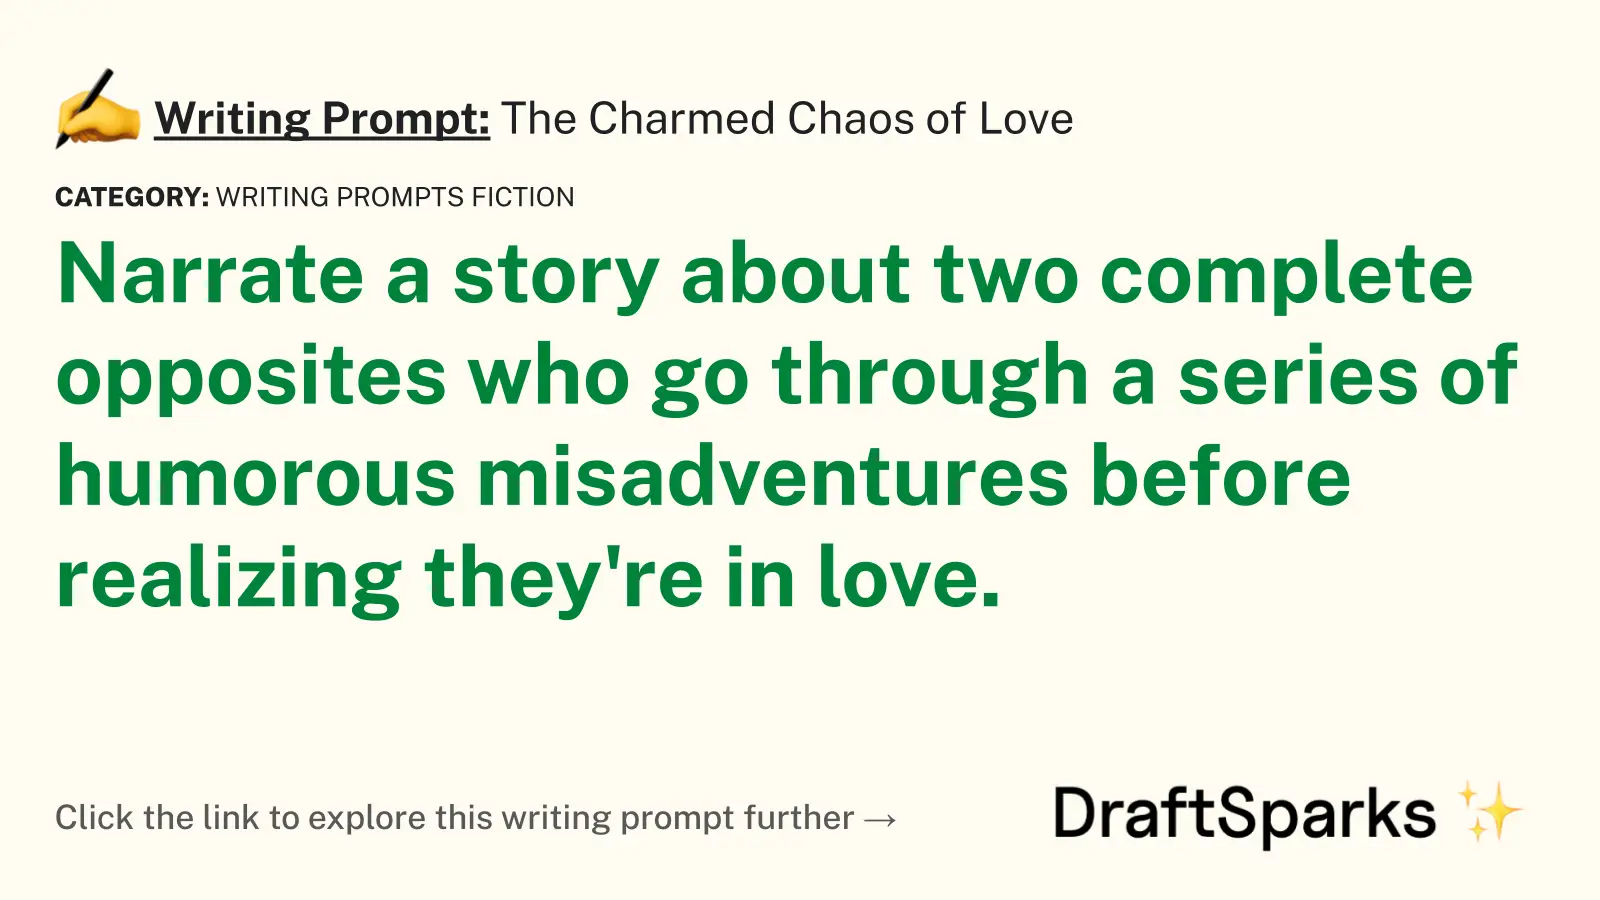 The Charmed Chaos of Love